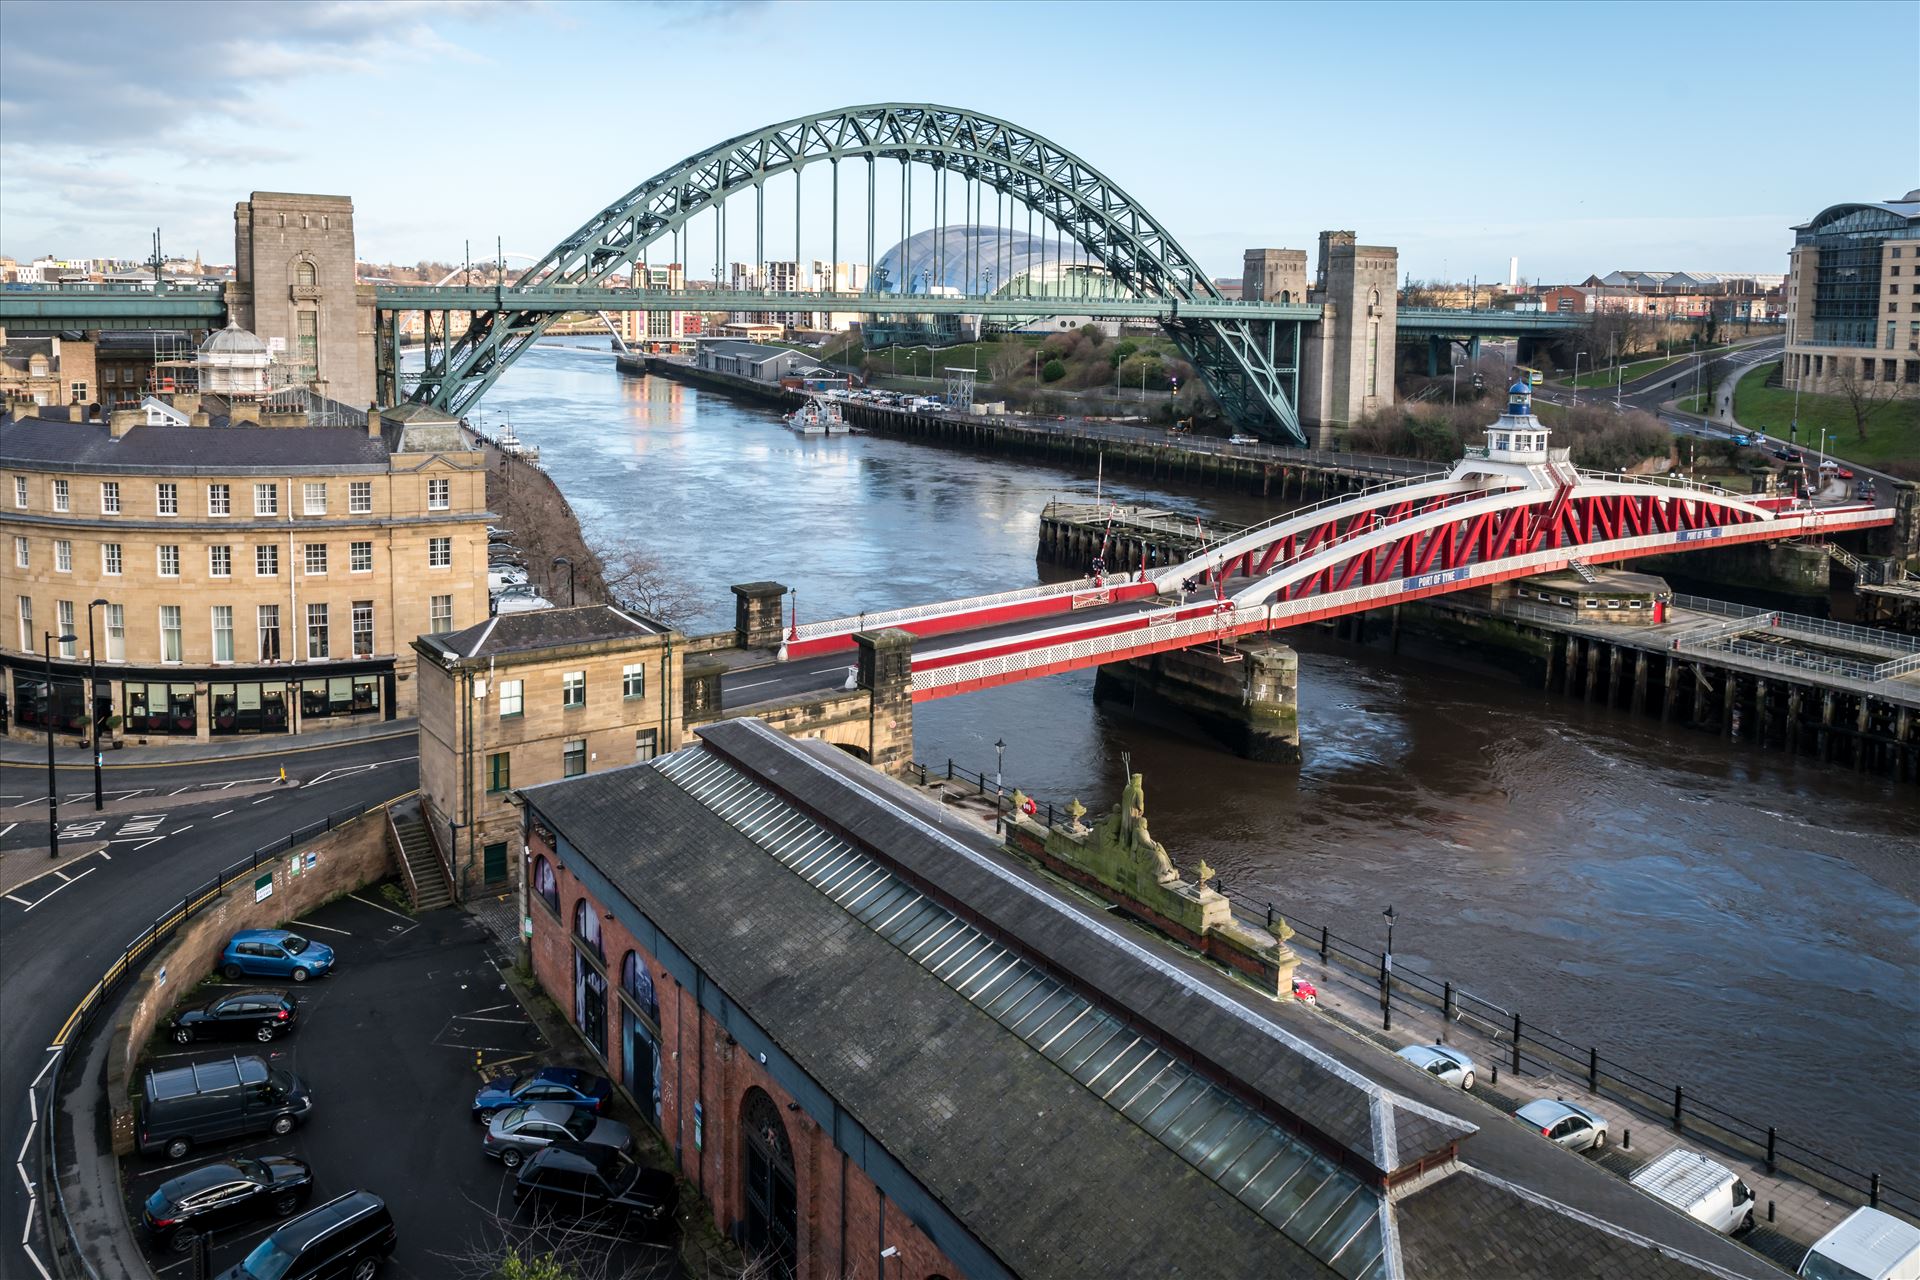 View from the High Level Bridge, Newcastle